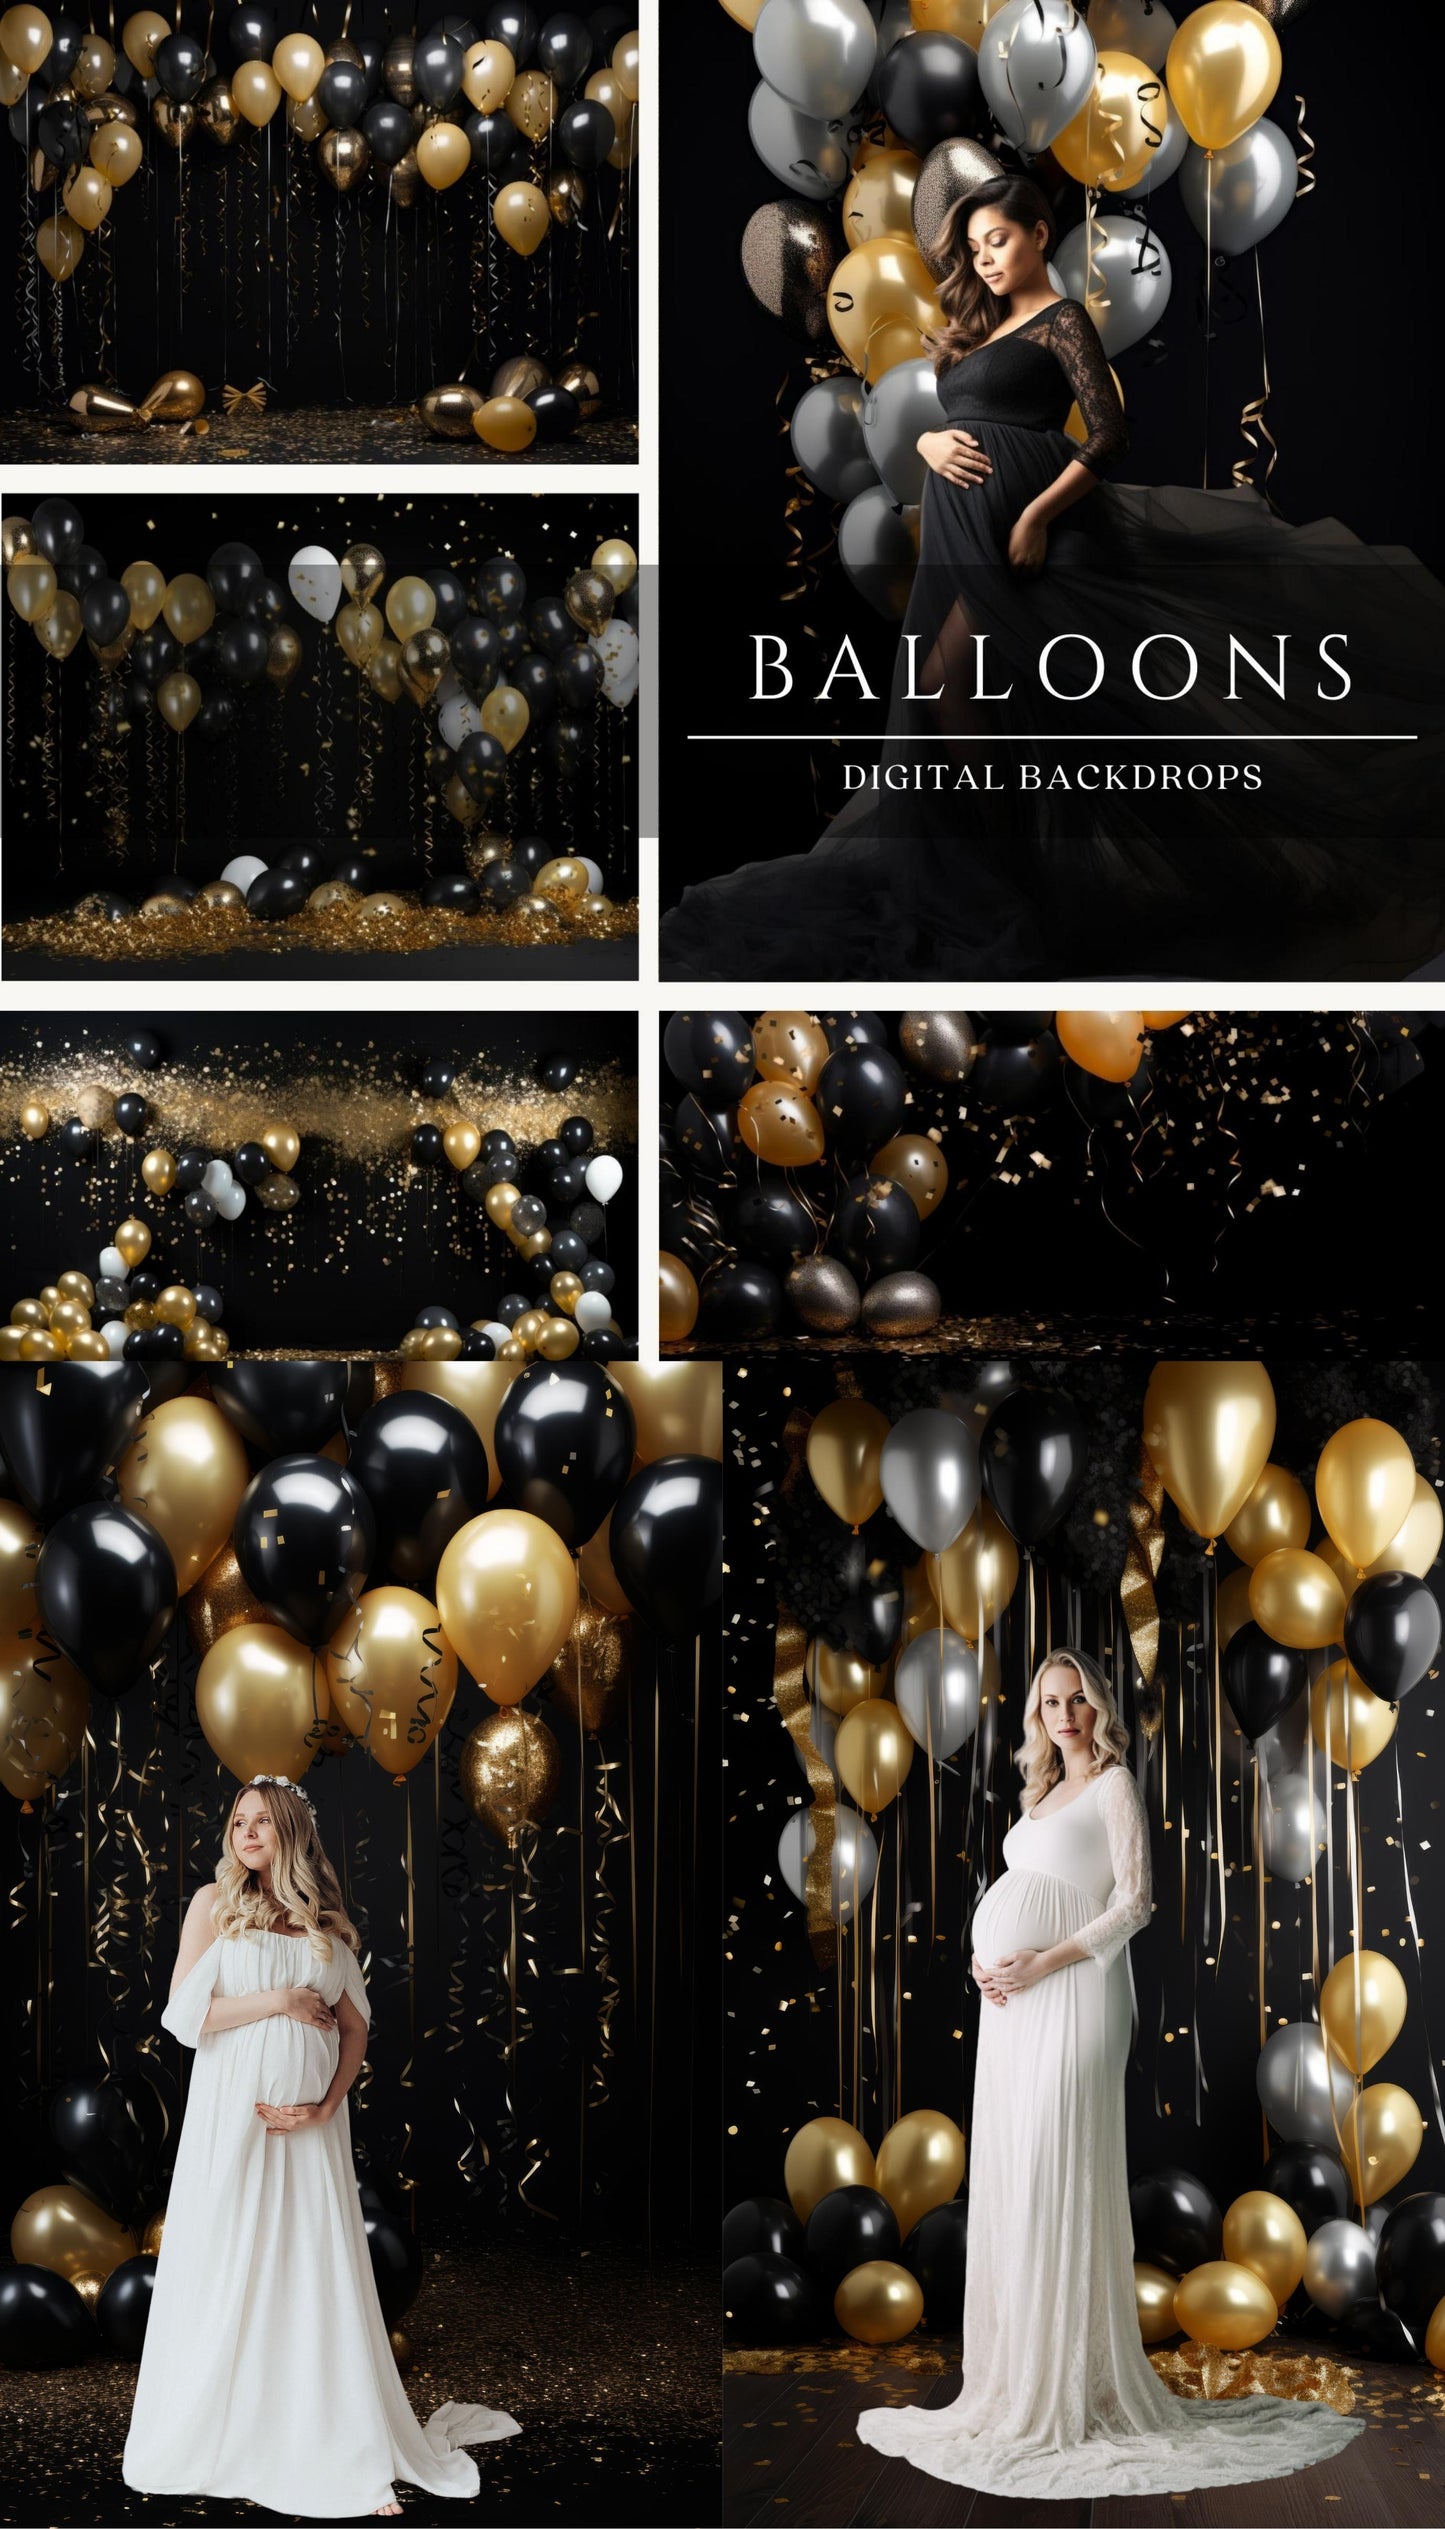 Gold and Black New Year's Party Balloons Digital Backdrops